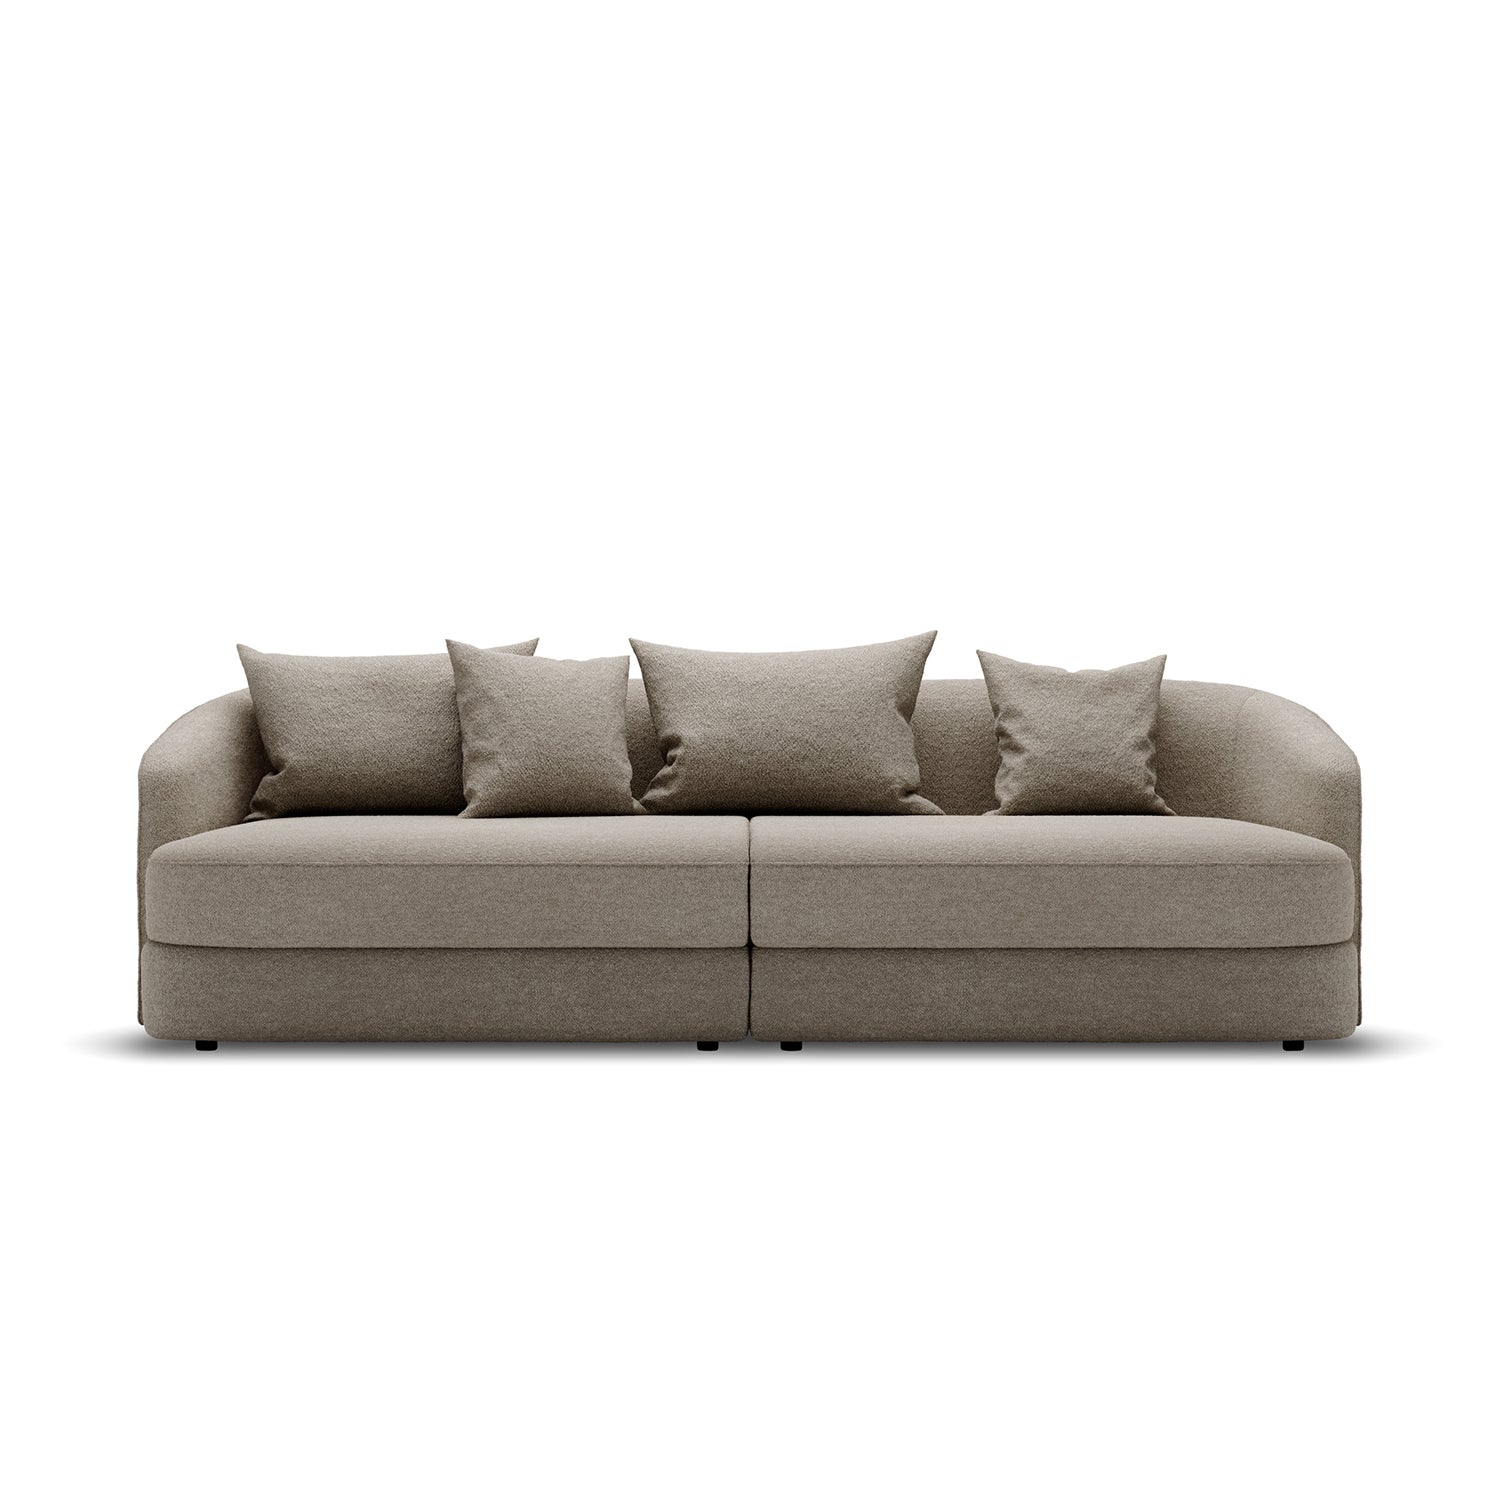 New Works Covent Residential Sofa in hemp